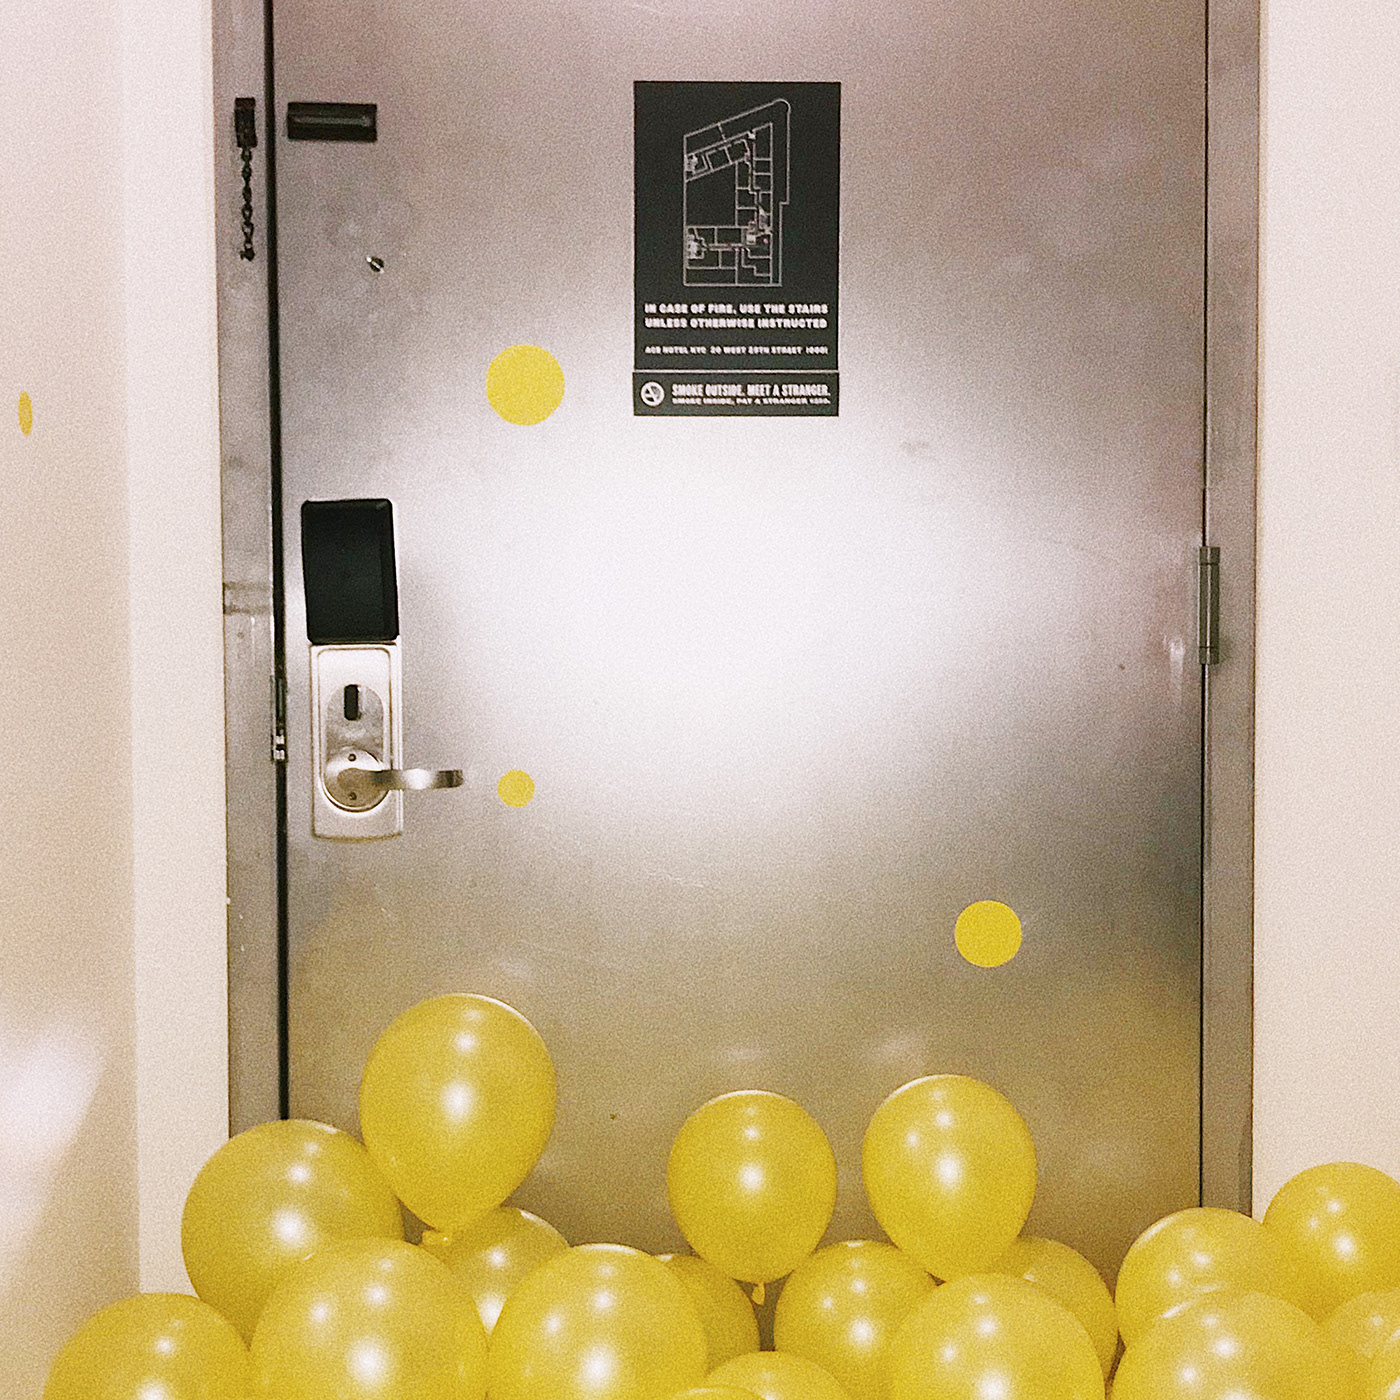 balloons Event party art nyc yellow color Refinery29 ace hotel